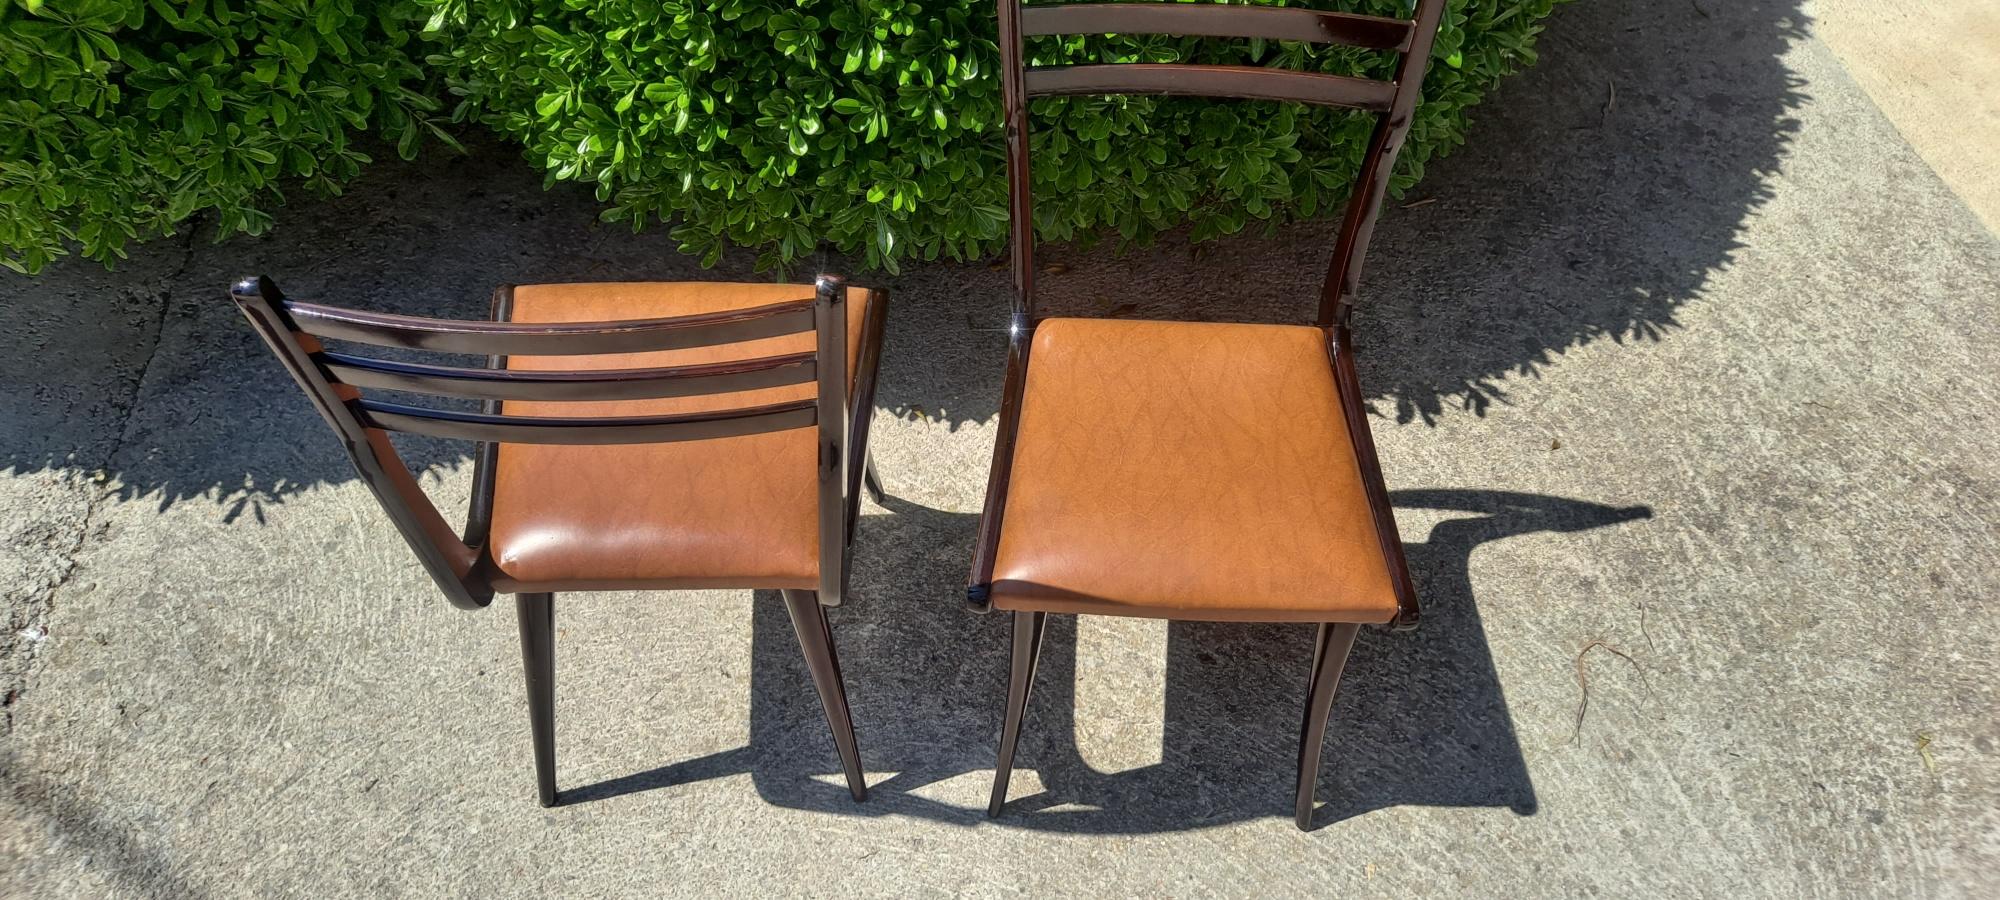 Mid-20th Century Mahogany Chairs in Style of Gio Ponti For Sale